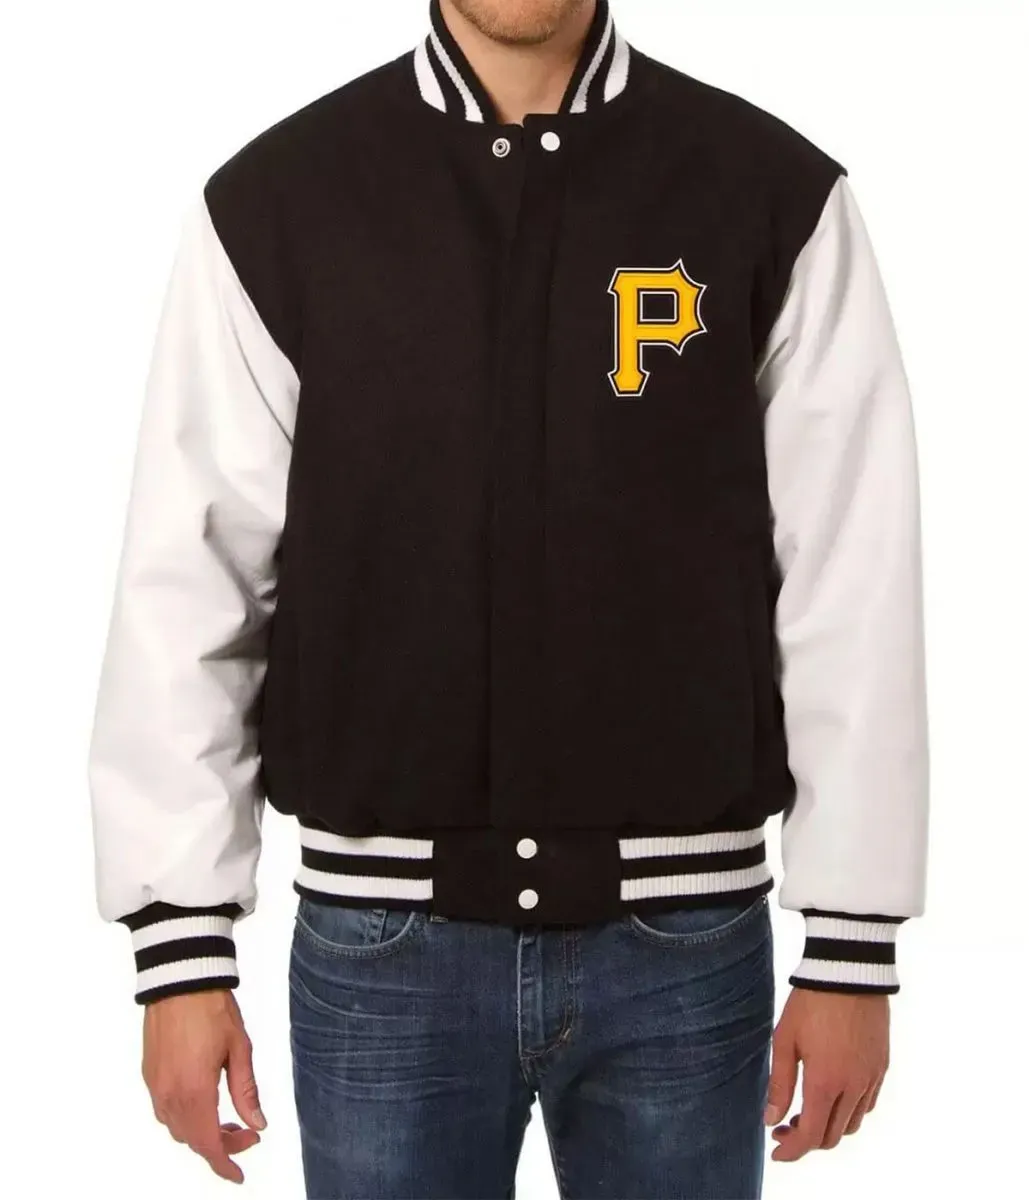 Pittsburgh Pirates Black and White Letterman Jacket